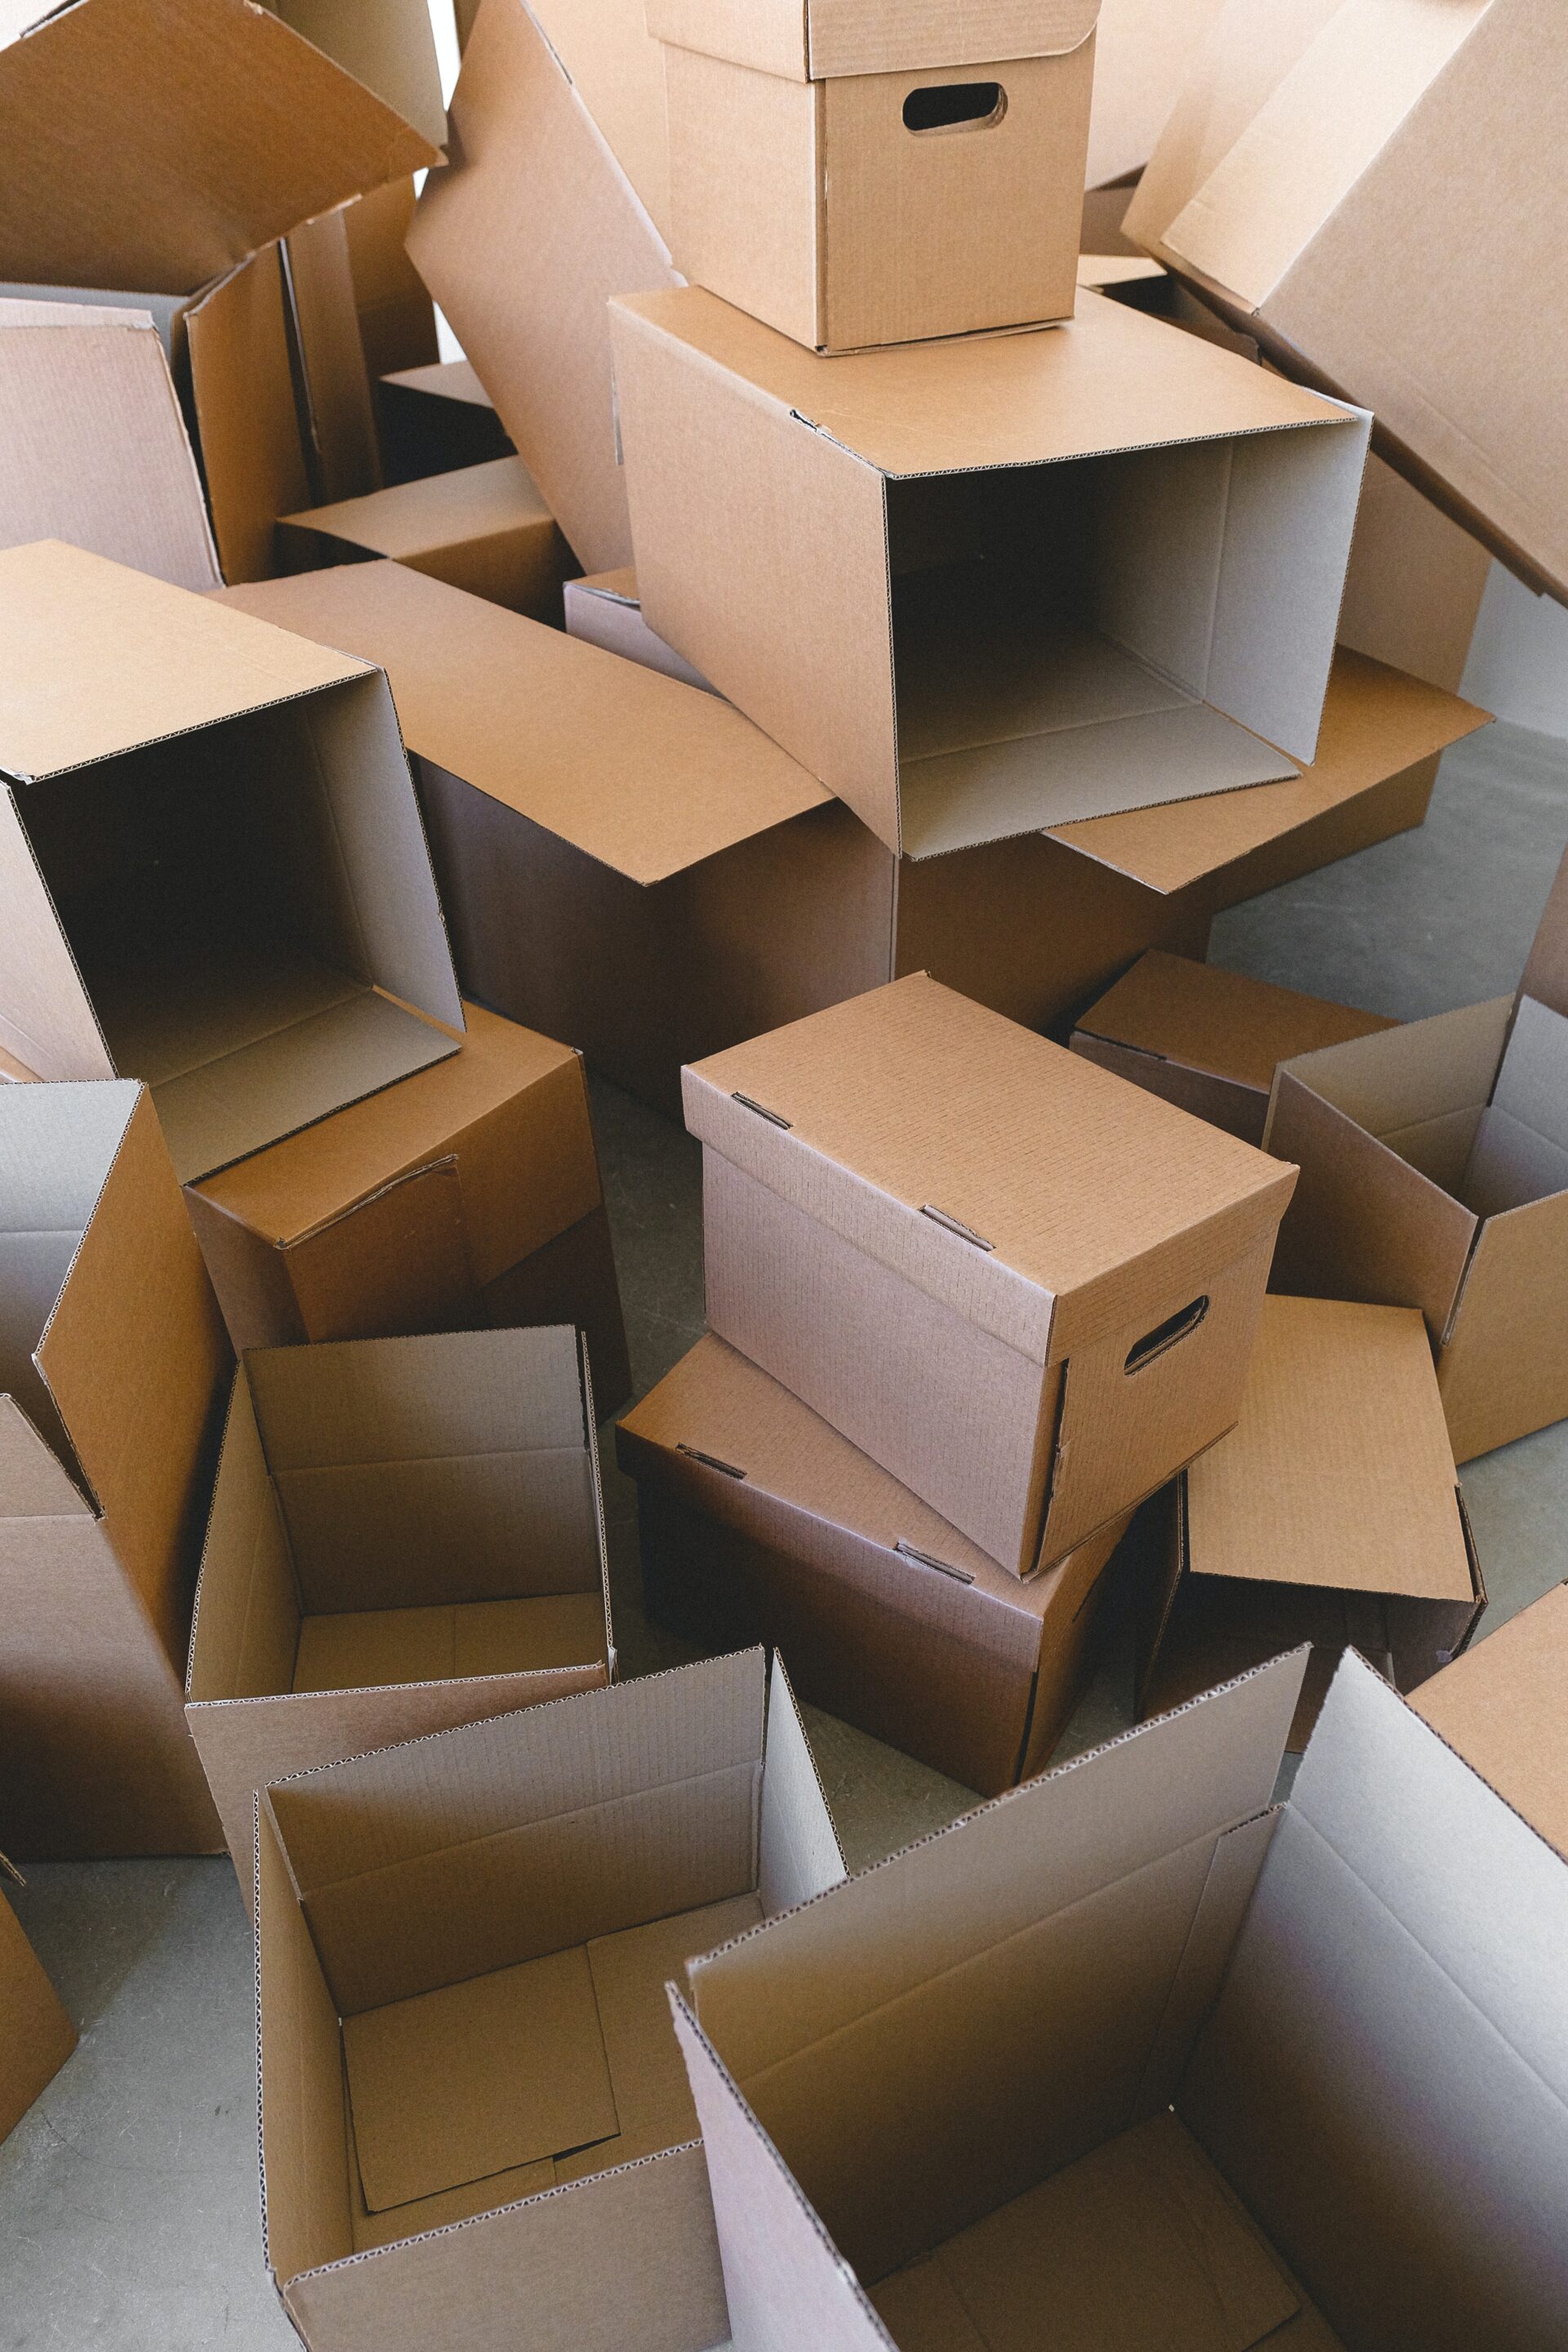 How to recycle packaging materials after moving house